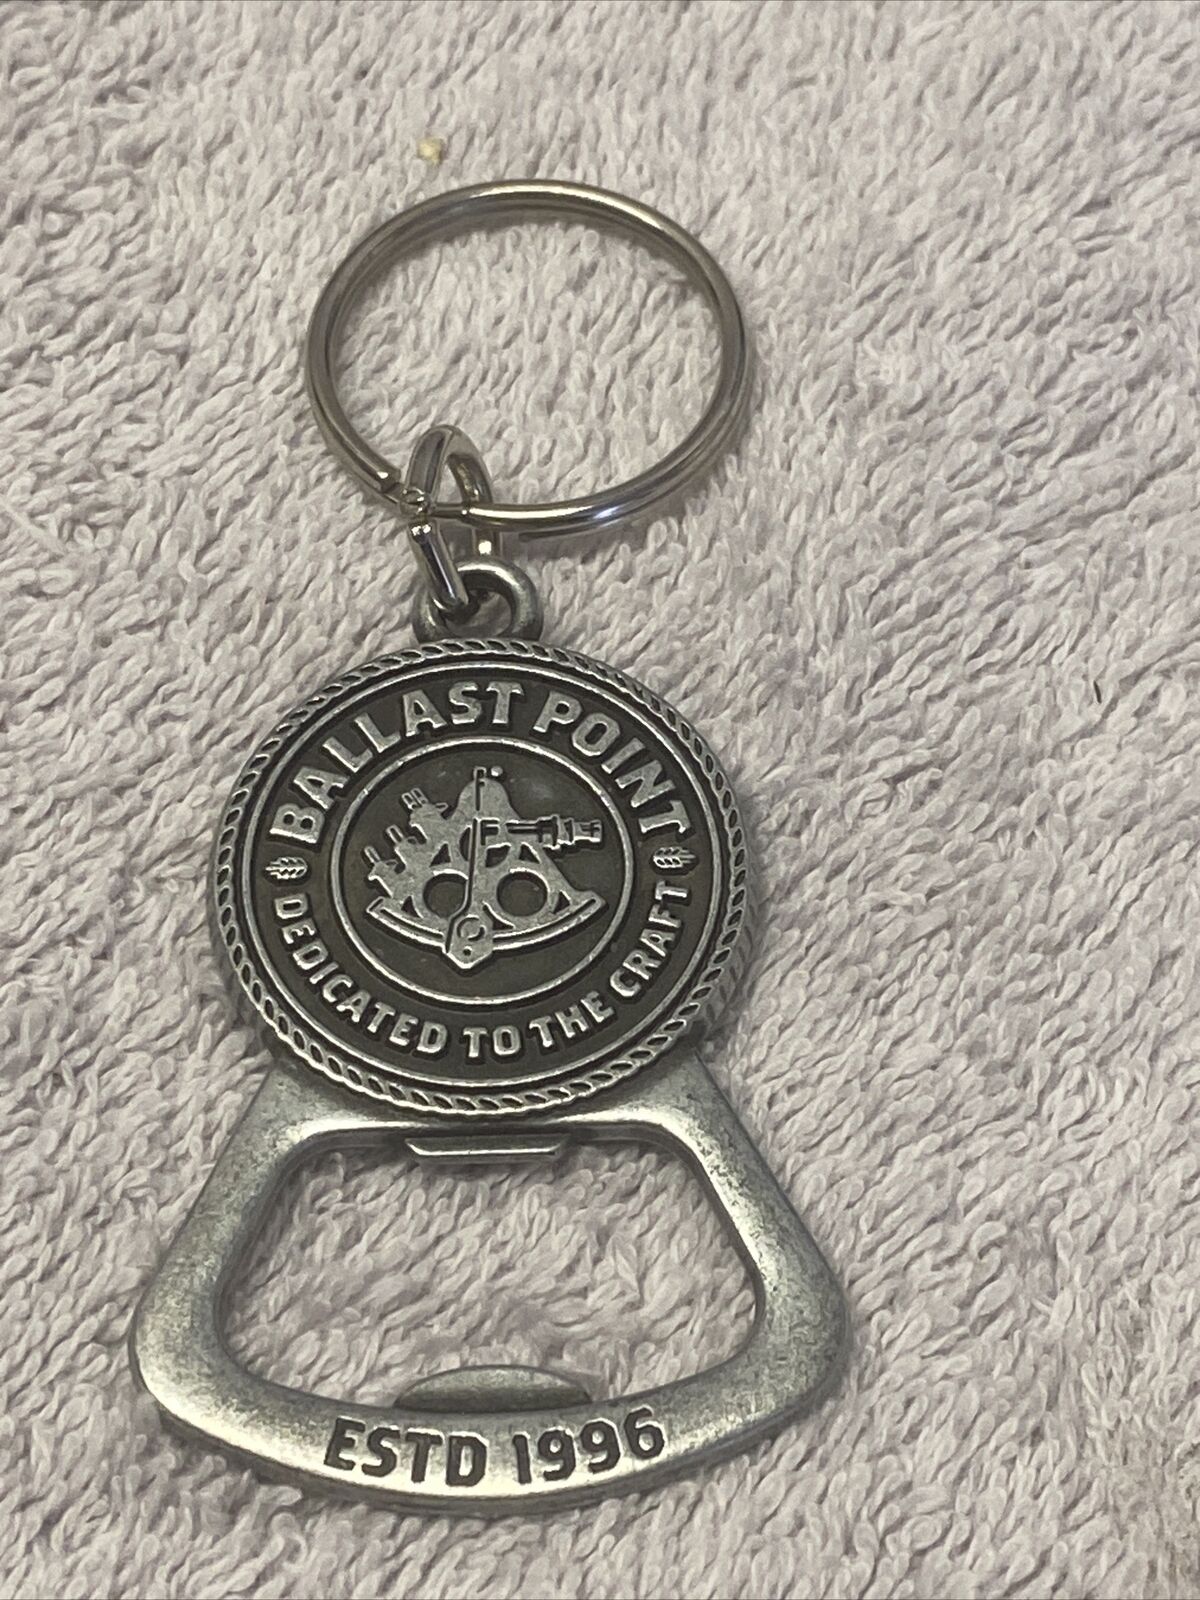 Ballast Point Brewing Company Nautical Scuba Diver Keychain Beer Bottle Opener